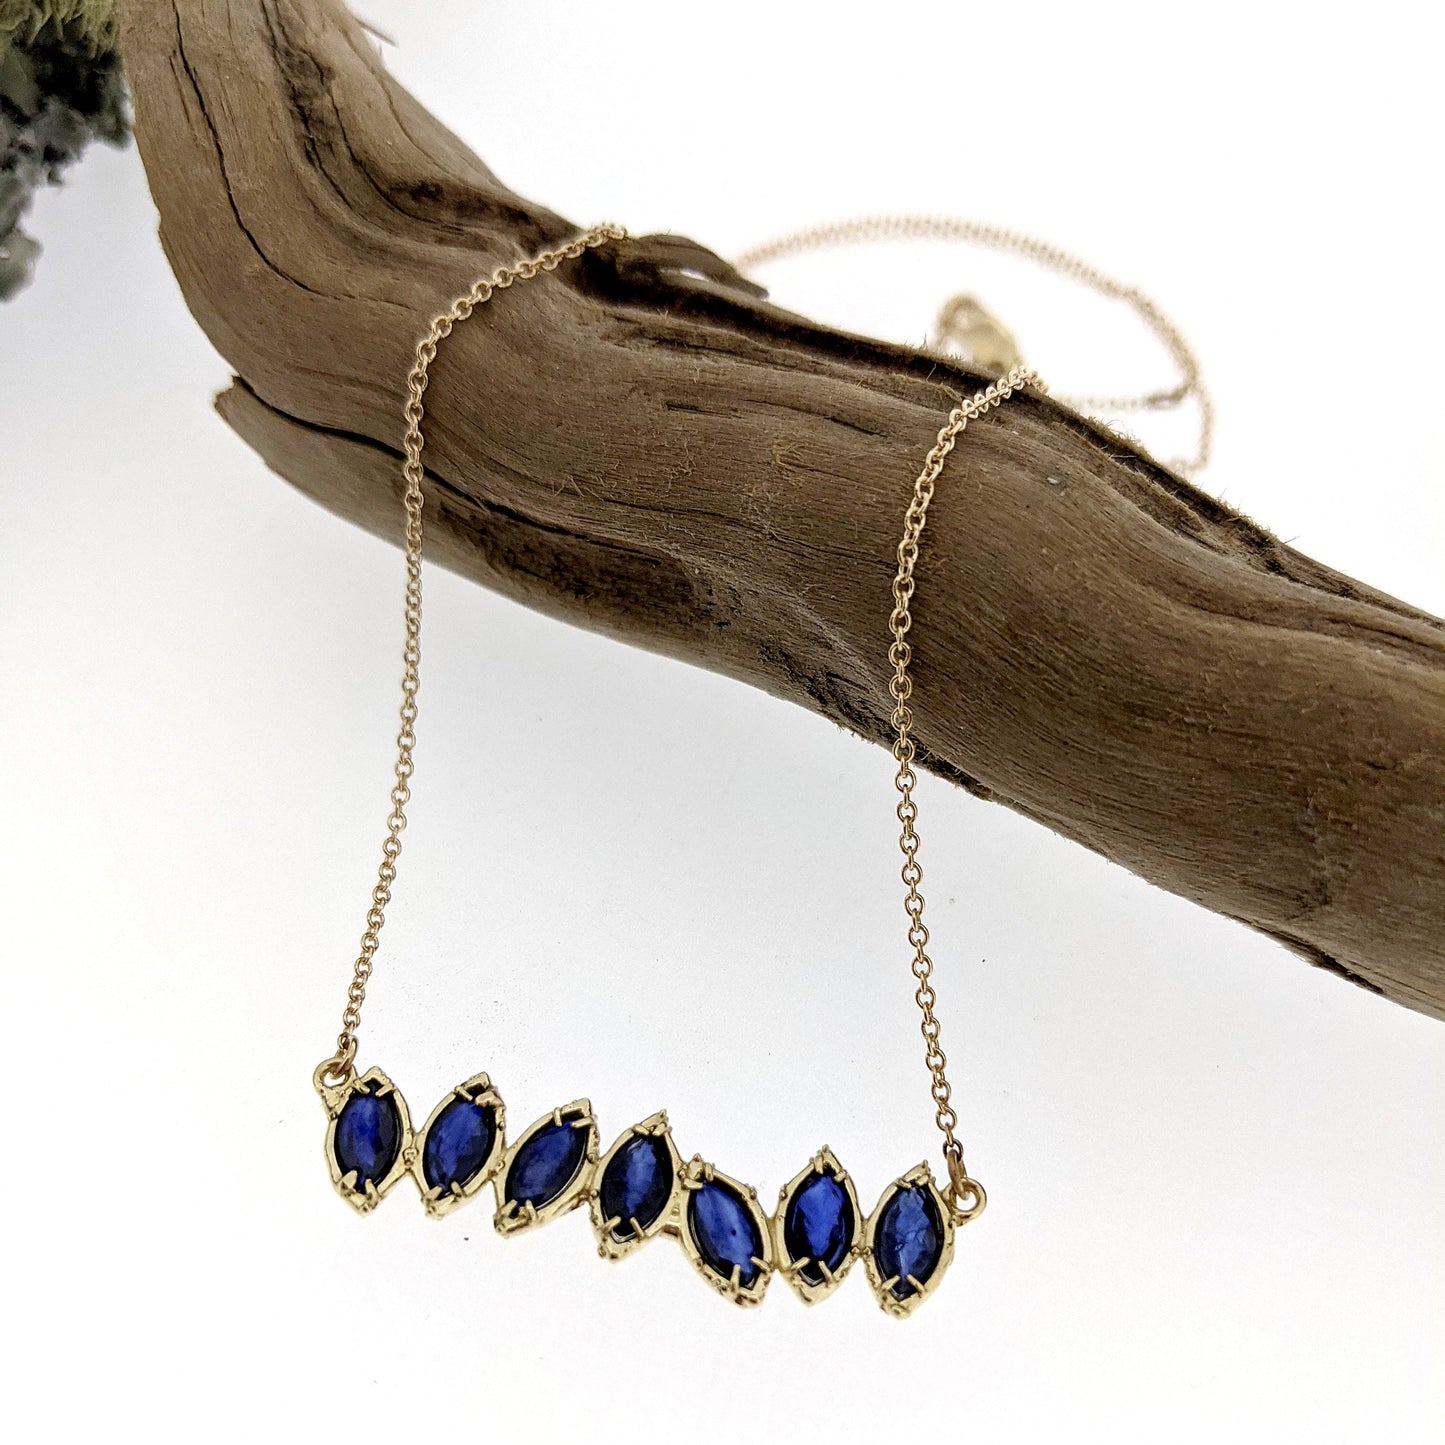 Full view of Sapphire Cherin necklace draped over stick.